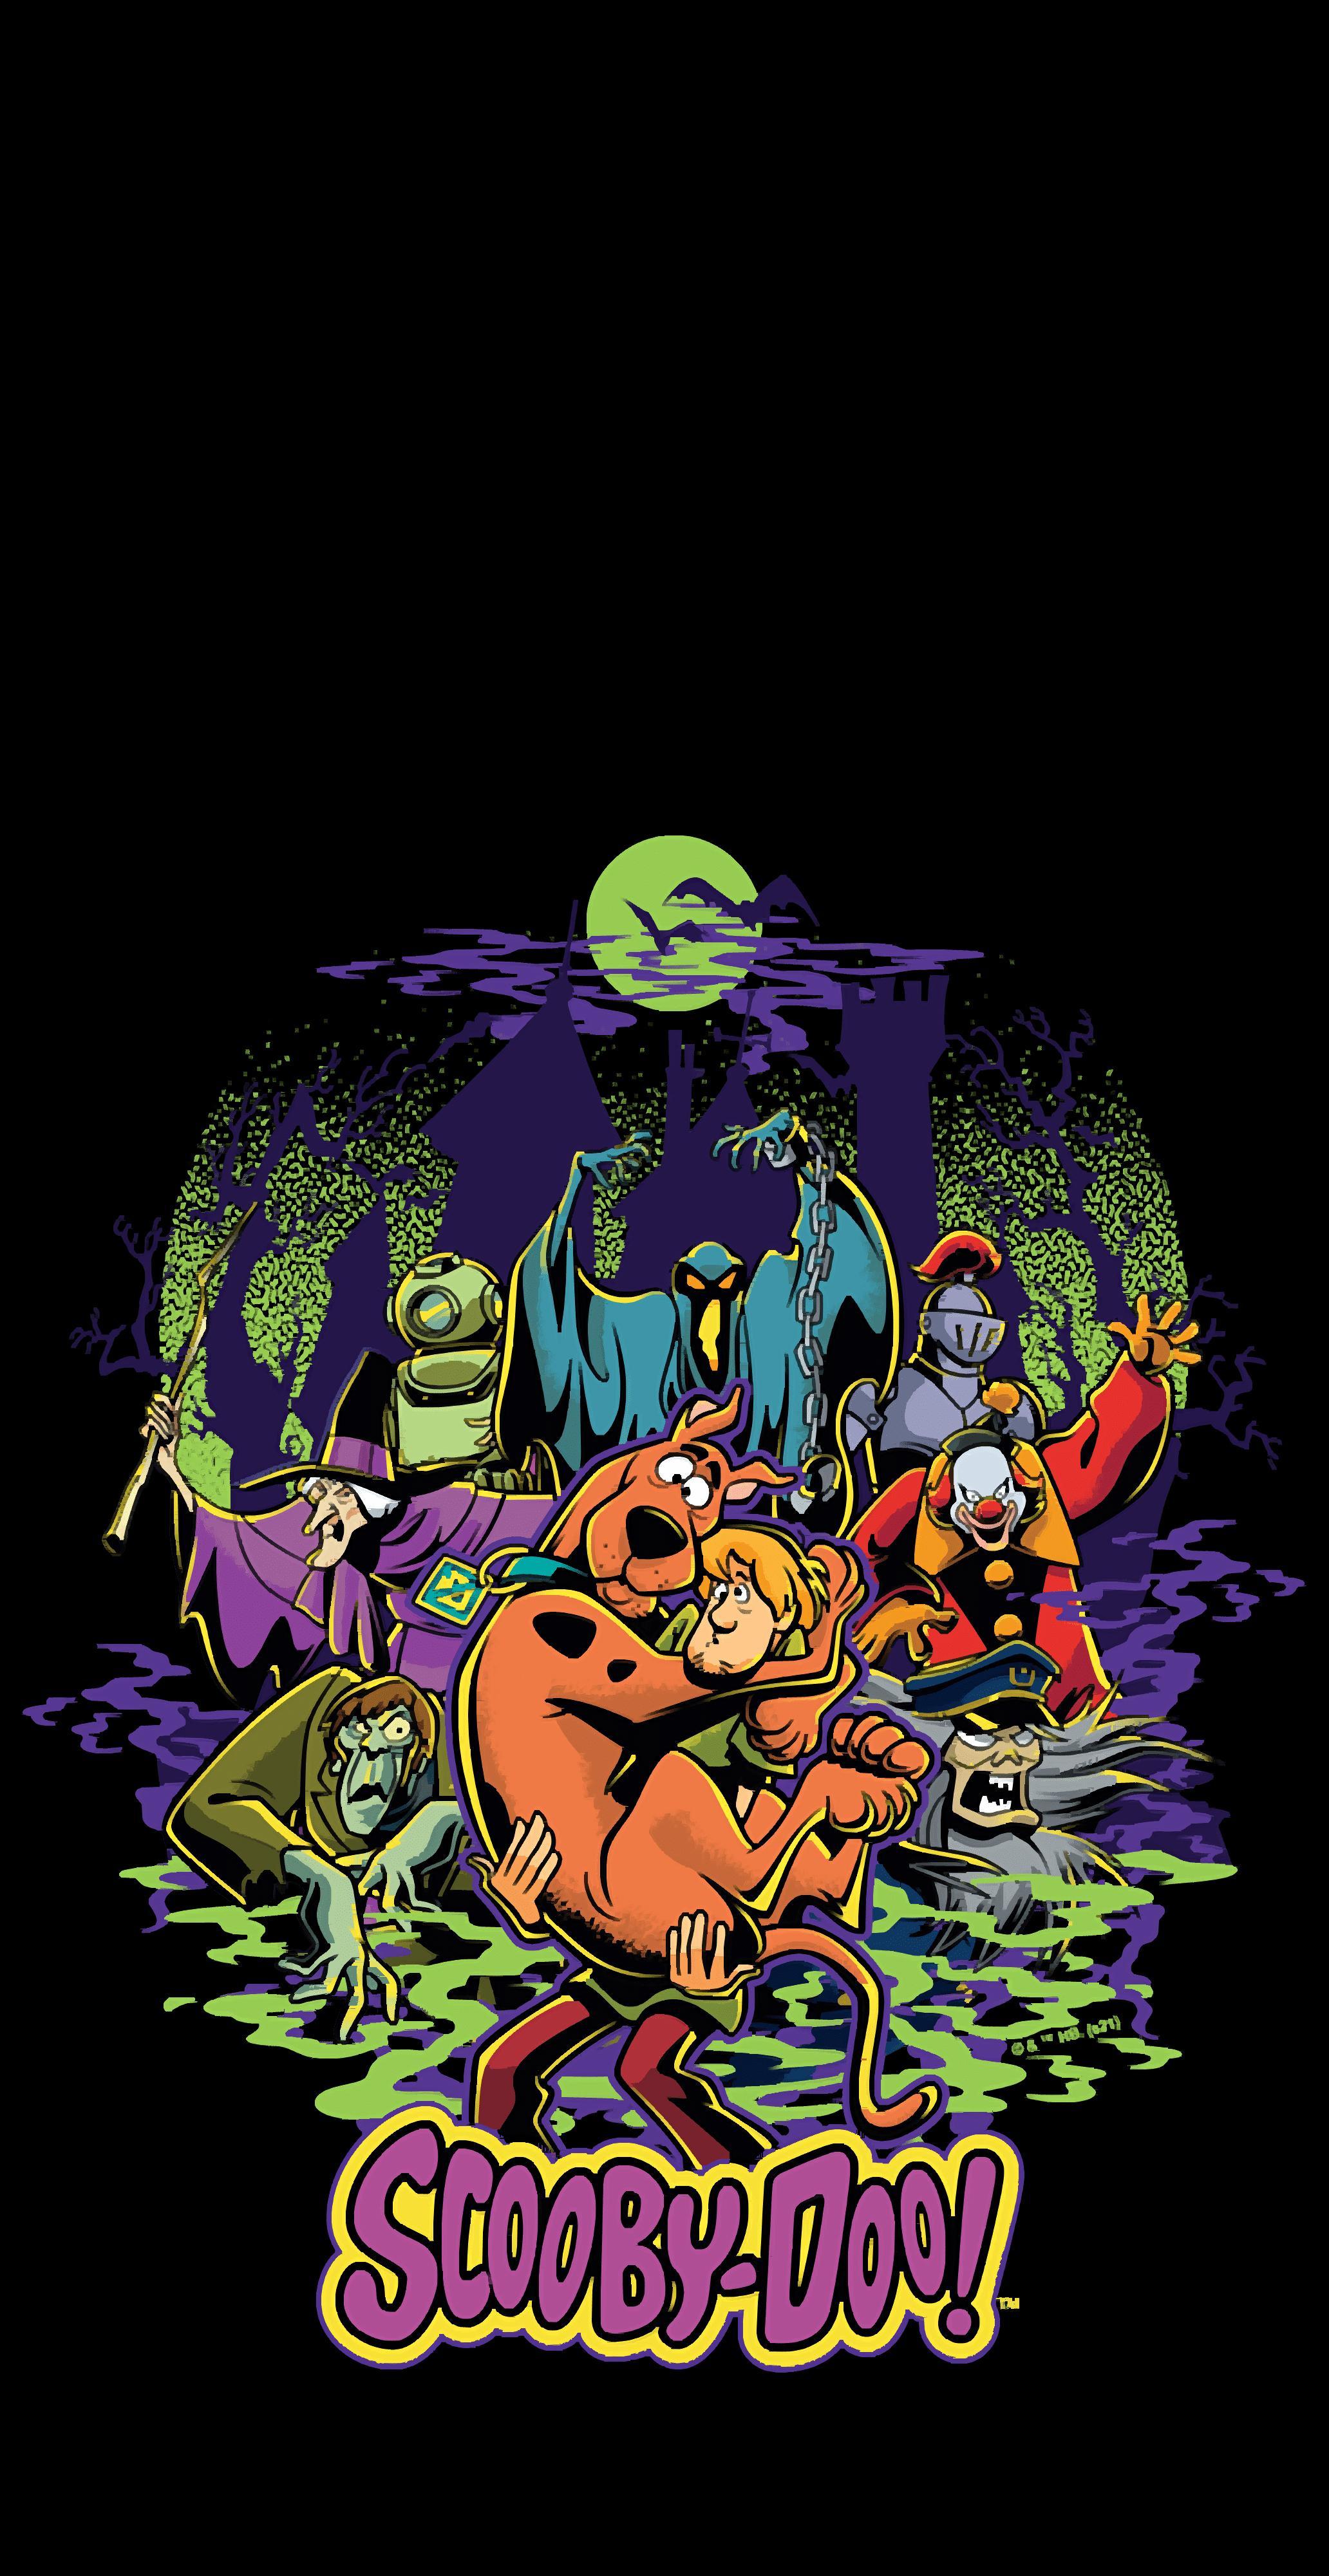 Put Together Some Phone Wallpaper R Scoobydoo